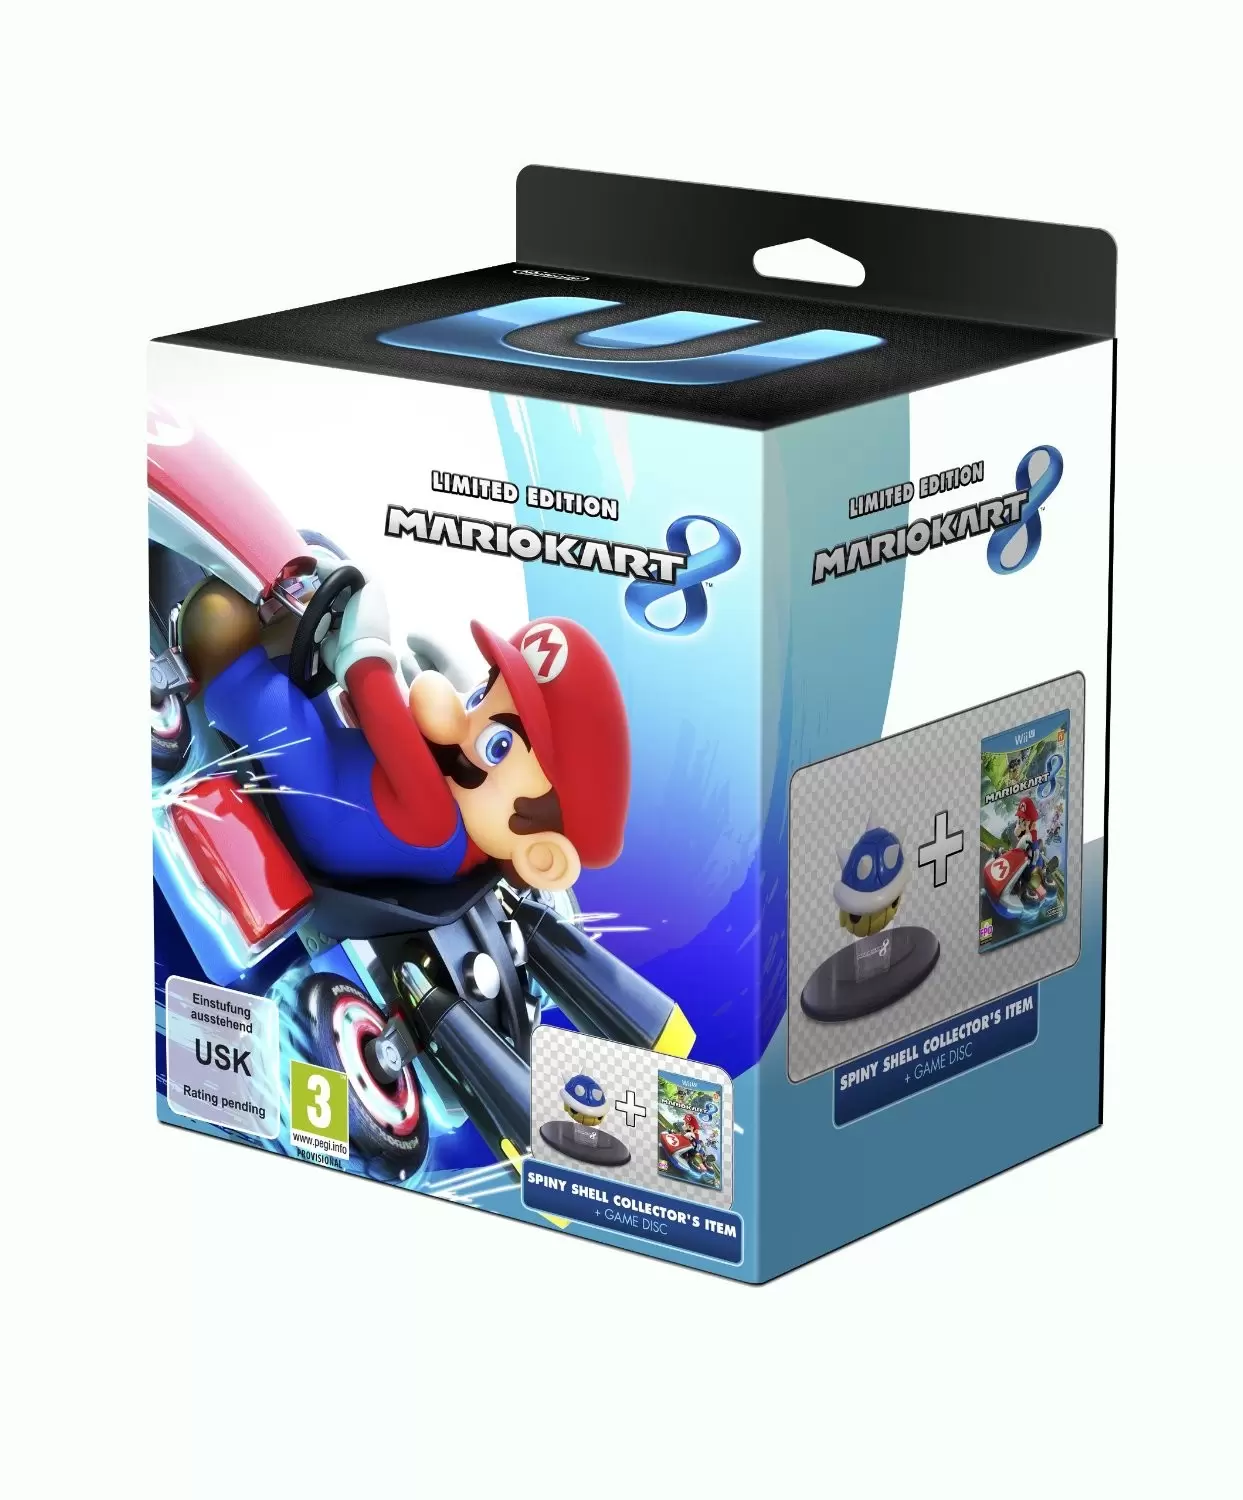 Jeux Wii U - Mario Kart 8 + Spiny Shell Collector